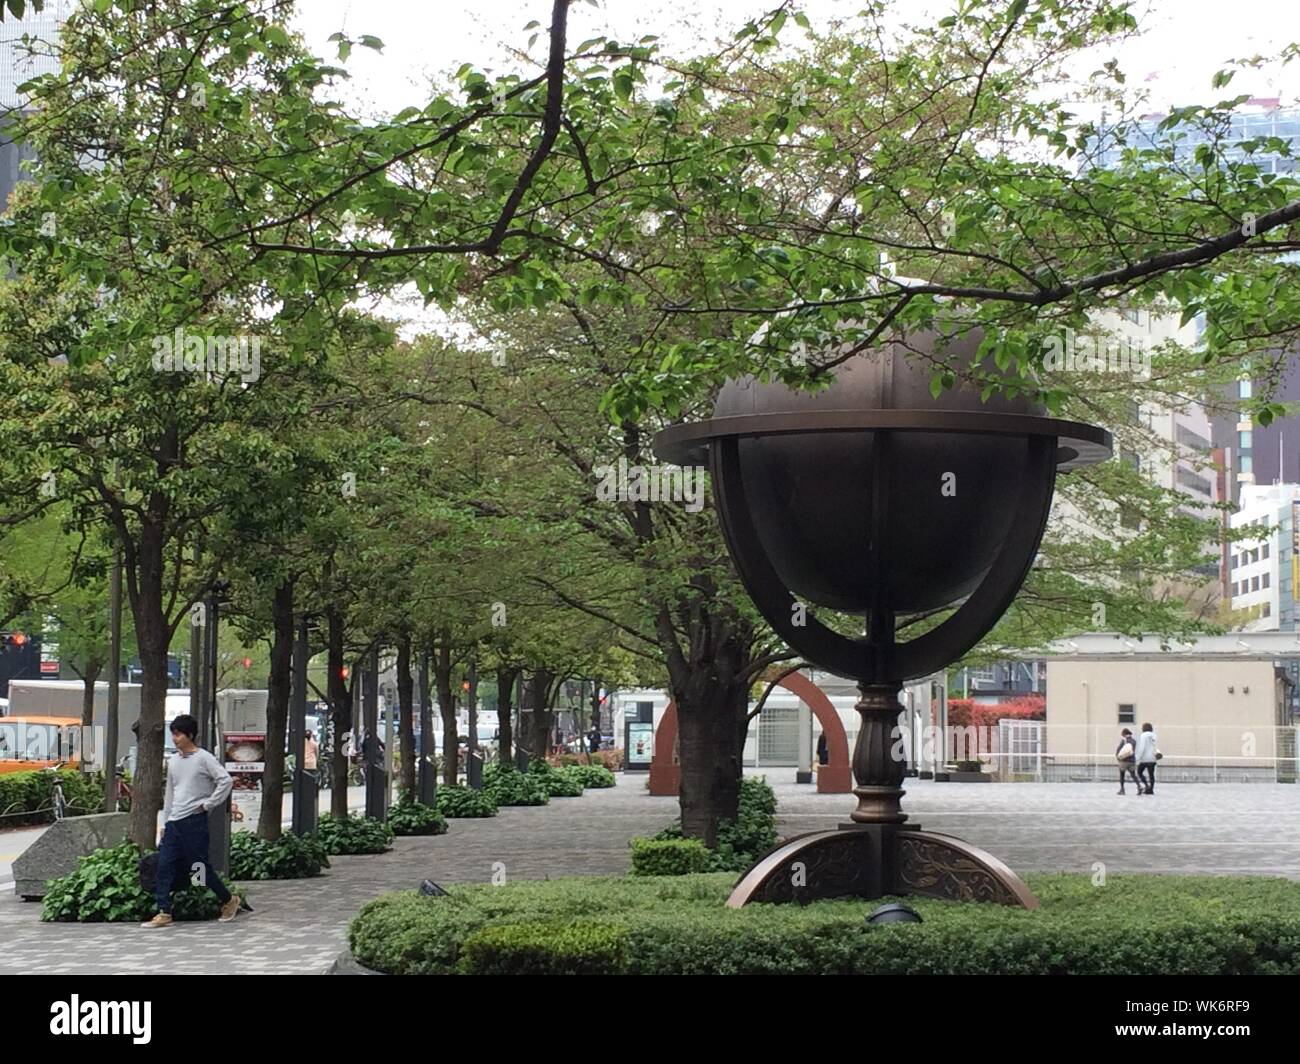 Globe Sculpture In Tree-lined City Street Stock Photo